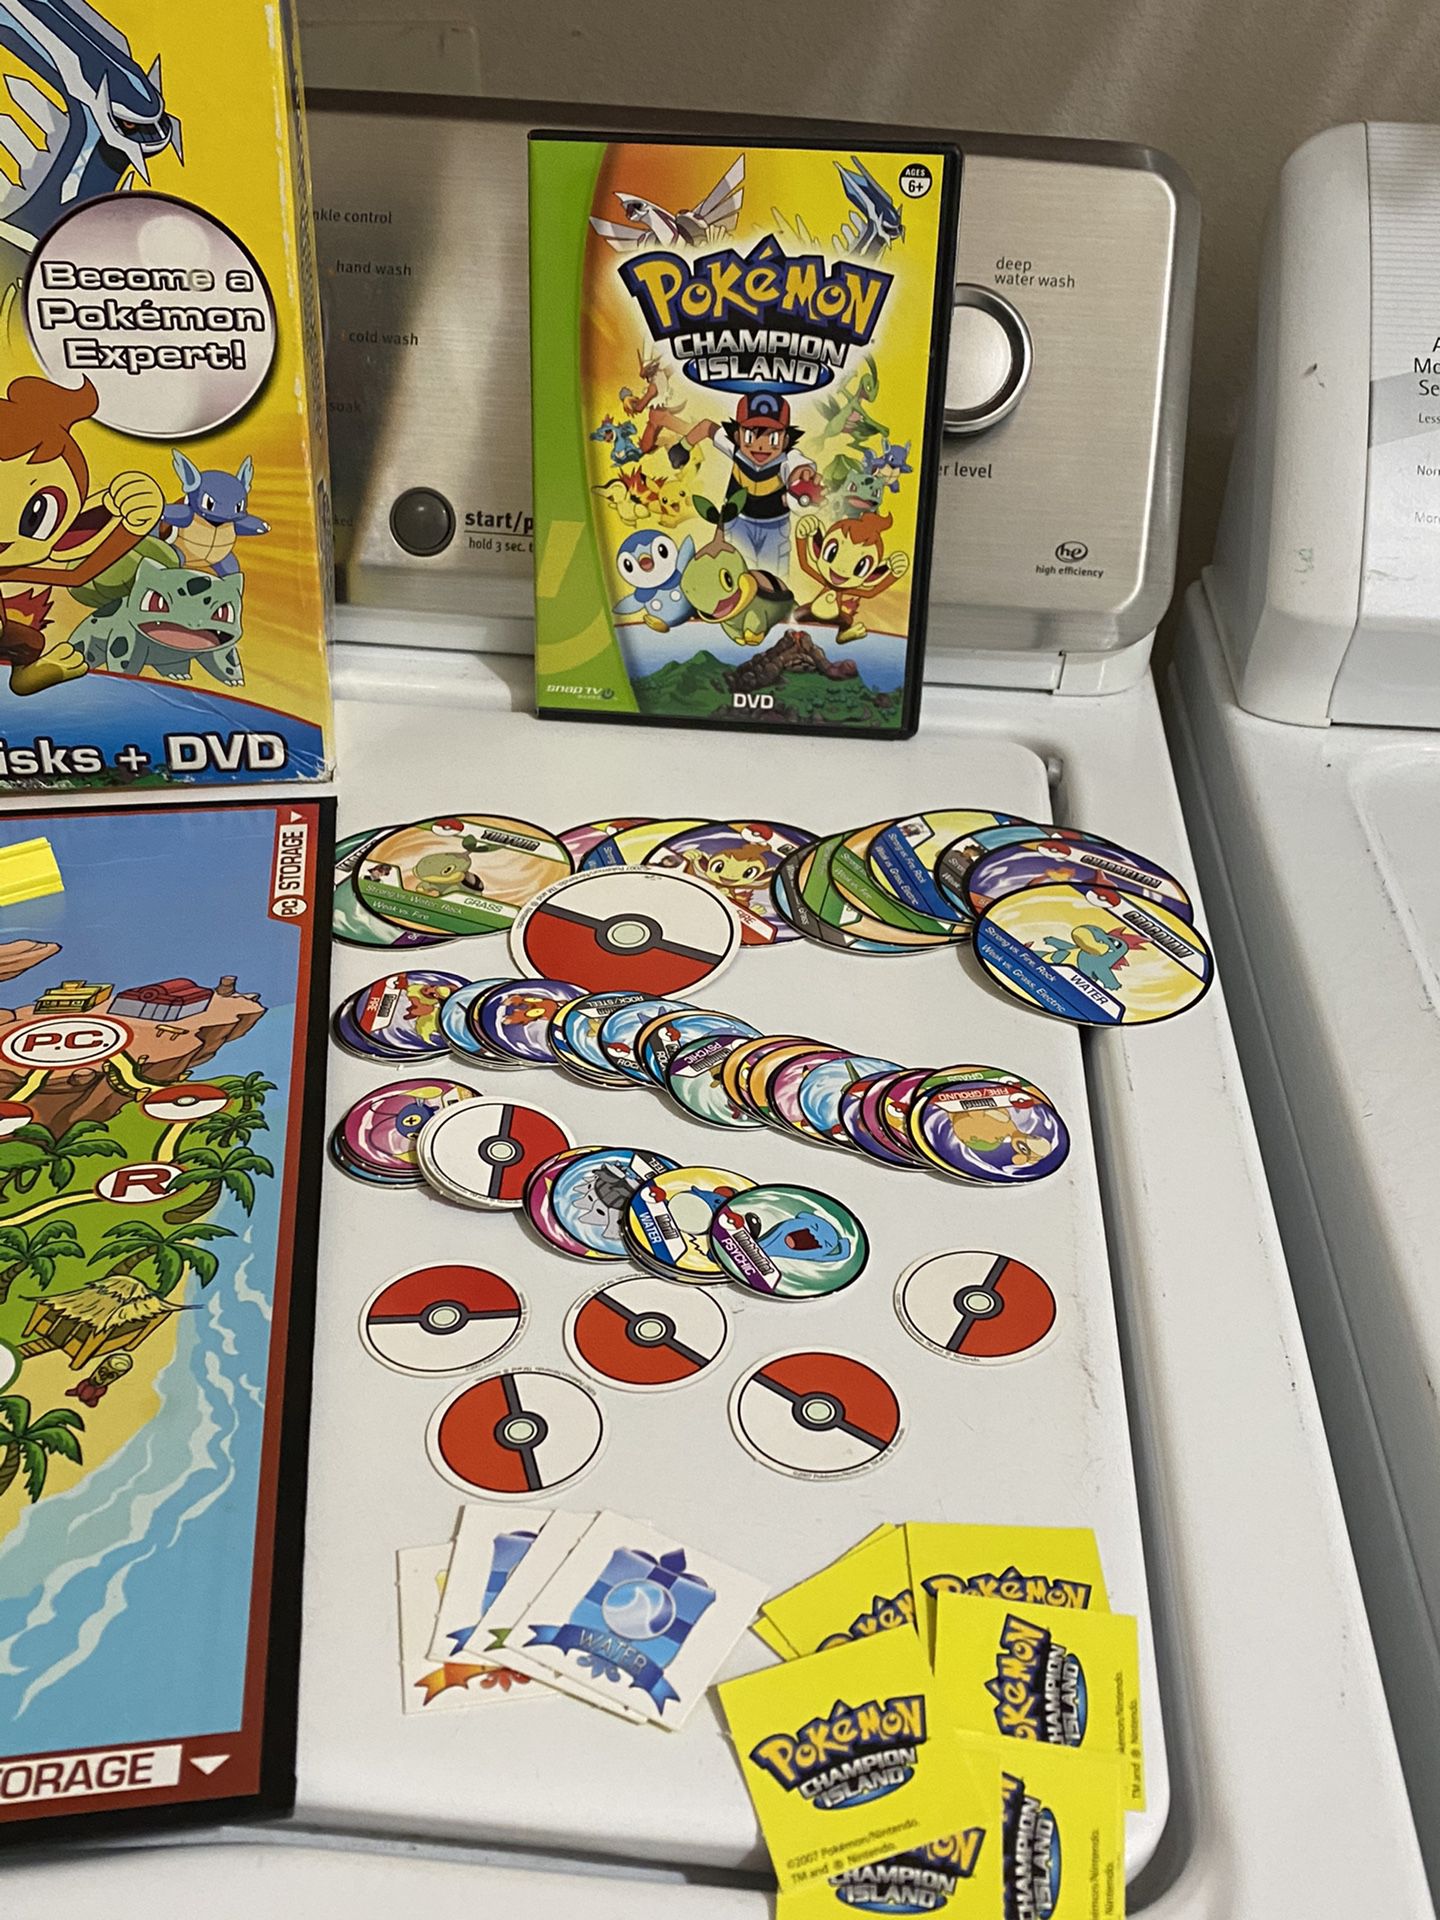 Pokemon Champion Island DVD Game 2007 You Pick Replacement Parts